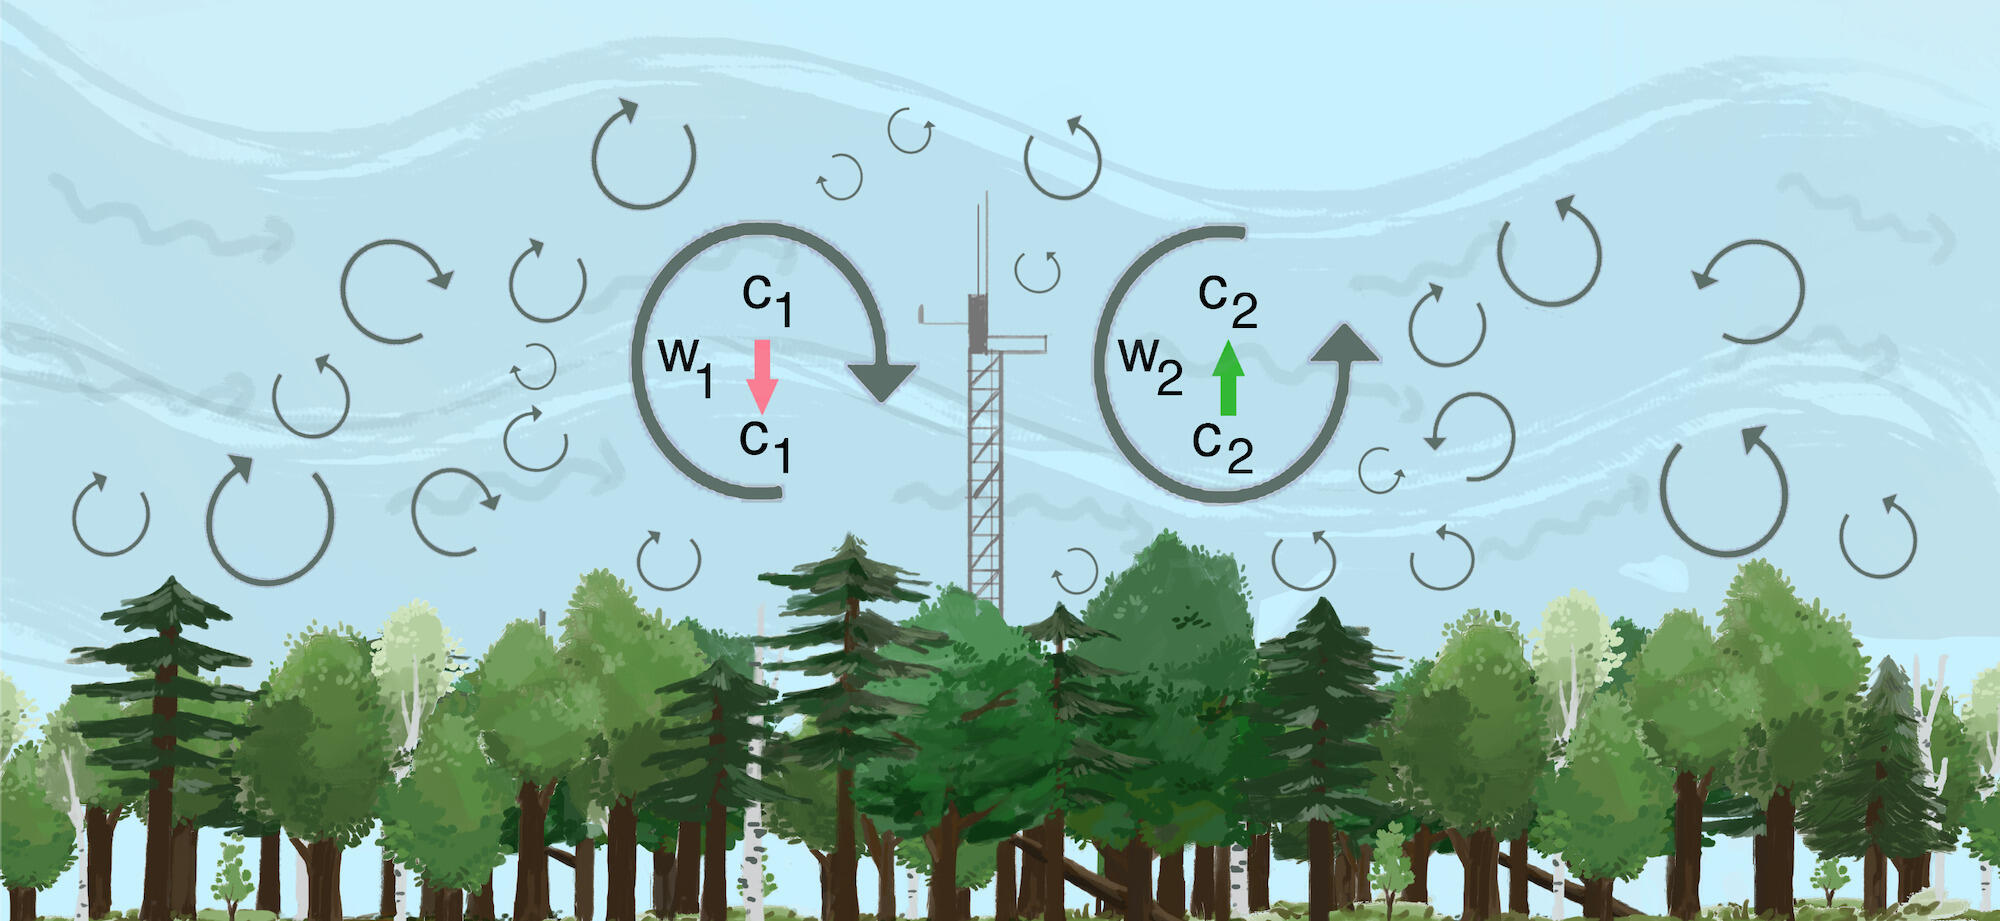 Illustration demonstrating the phenomenon known as eddy covariance, projecting carbon emissions as they interact with wind patterns and a forested habitat.